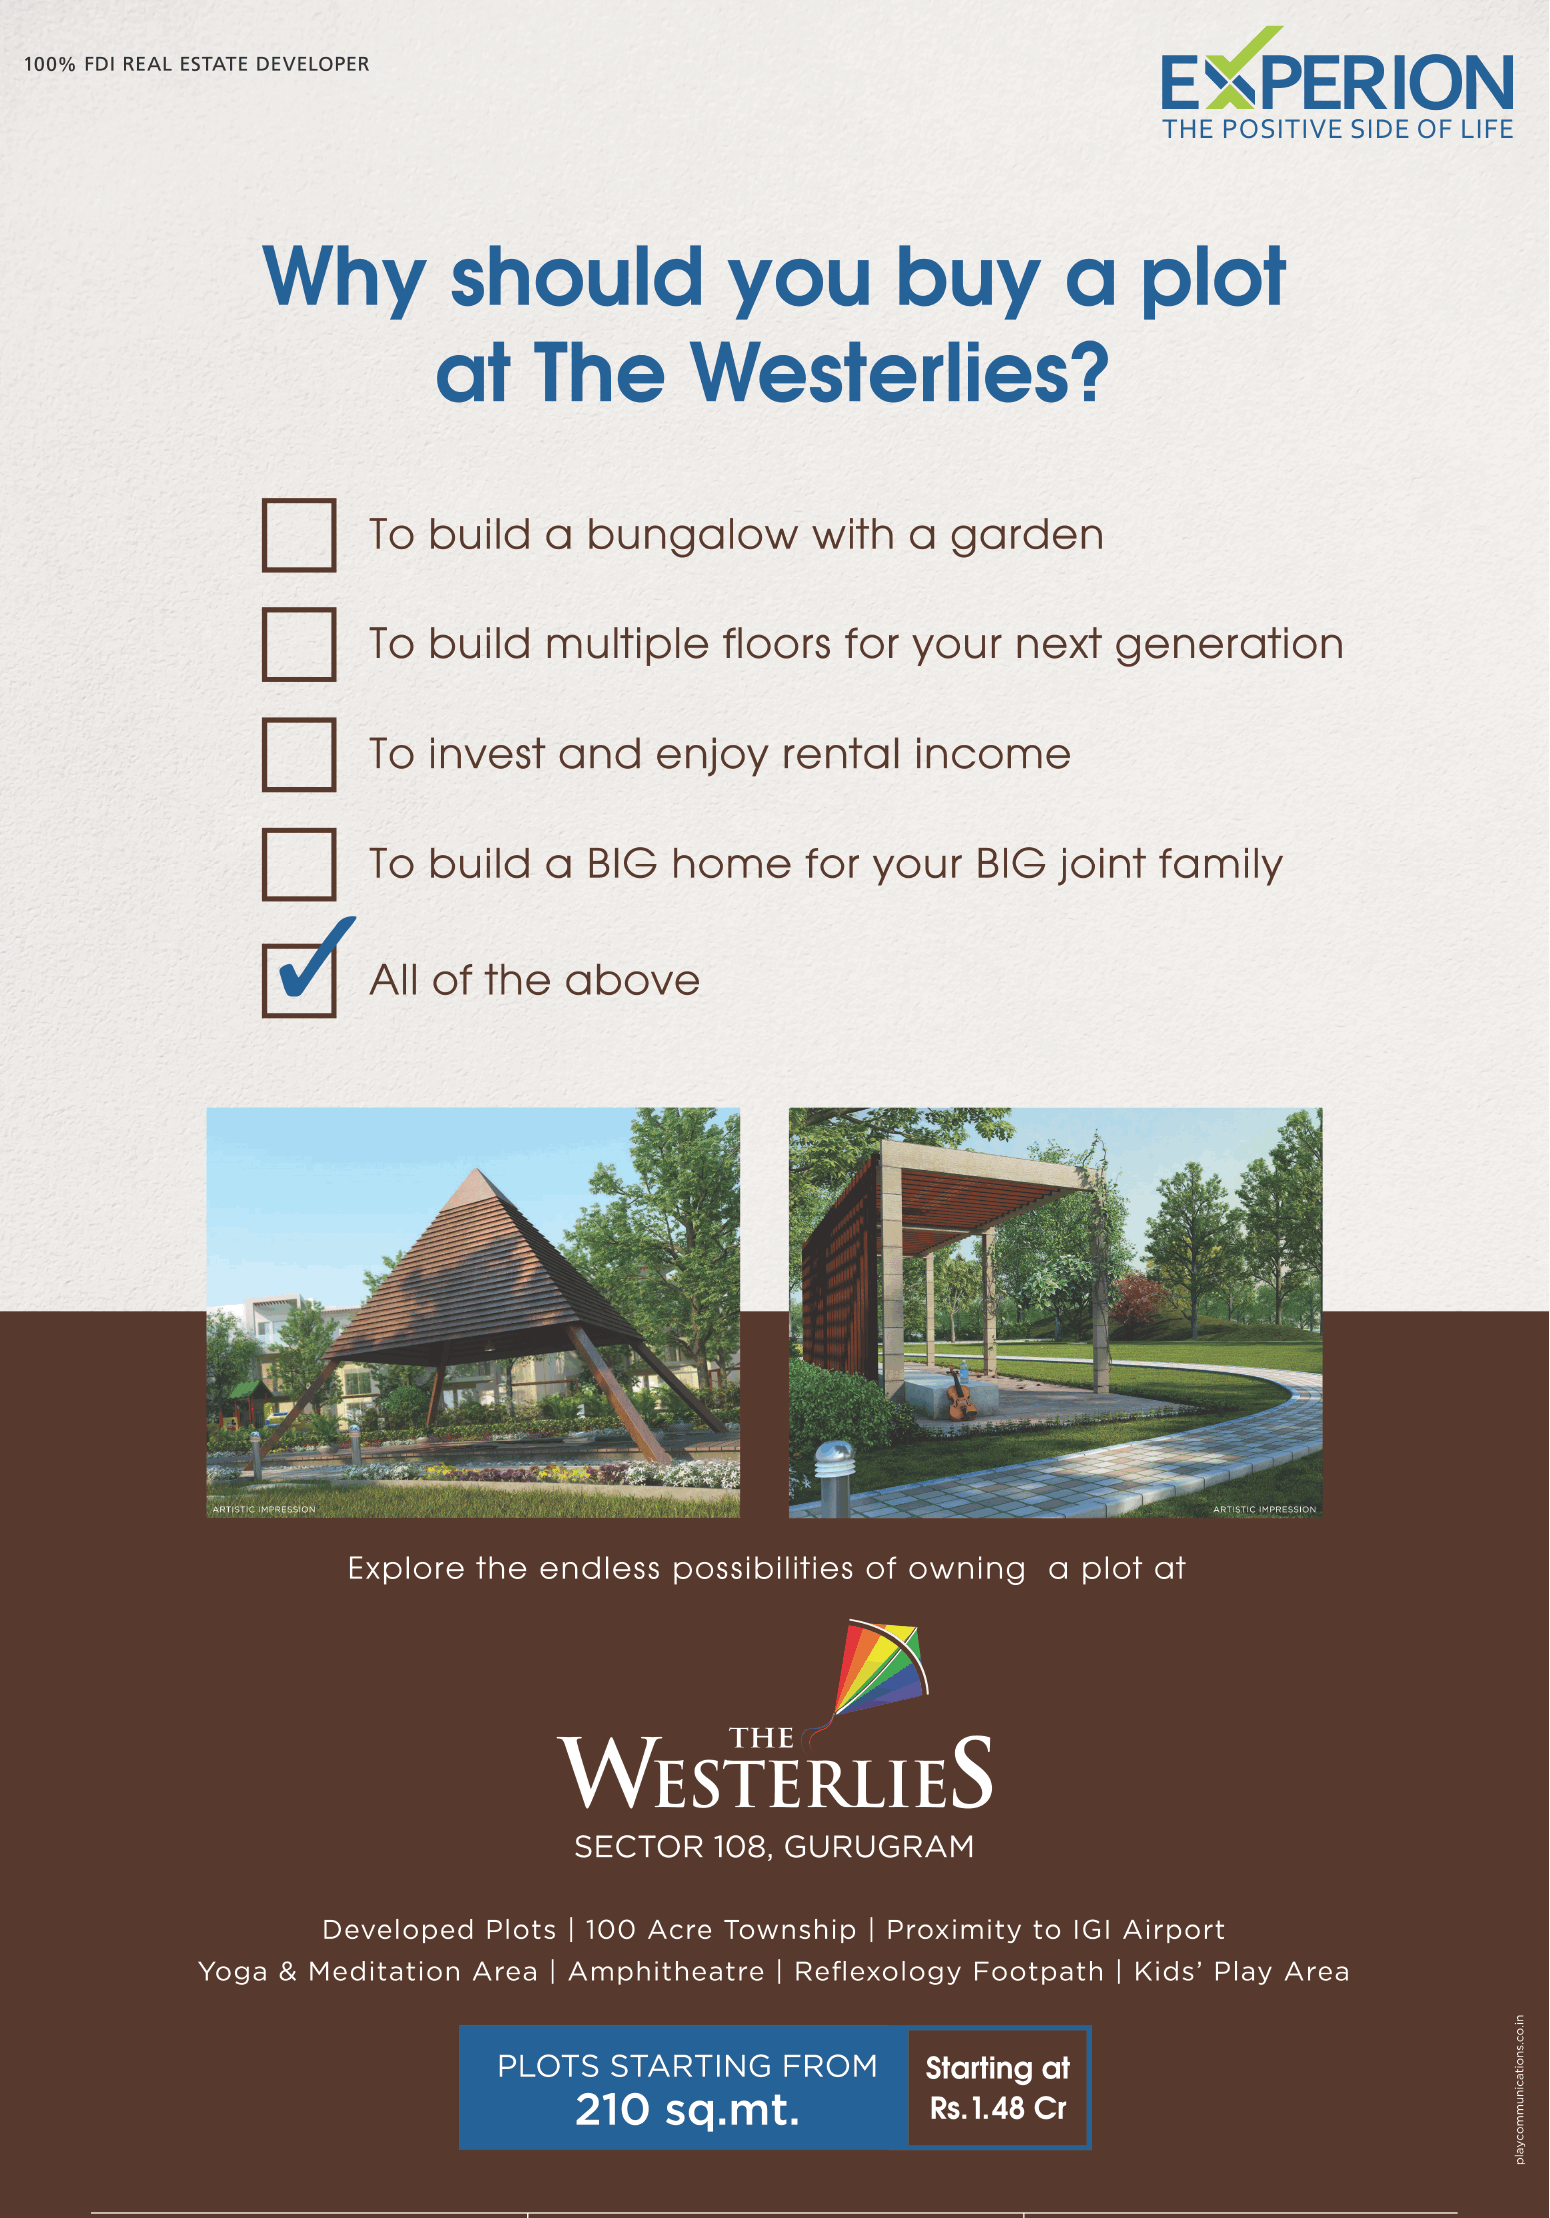 Plots starting Rs.1.48 Cr at Experion The Westerlies in Gurgaon Update